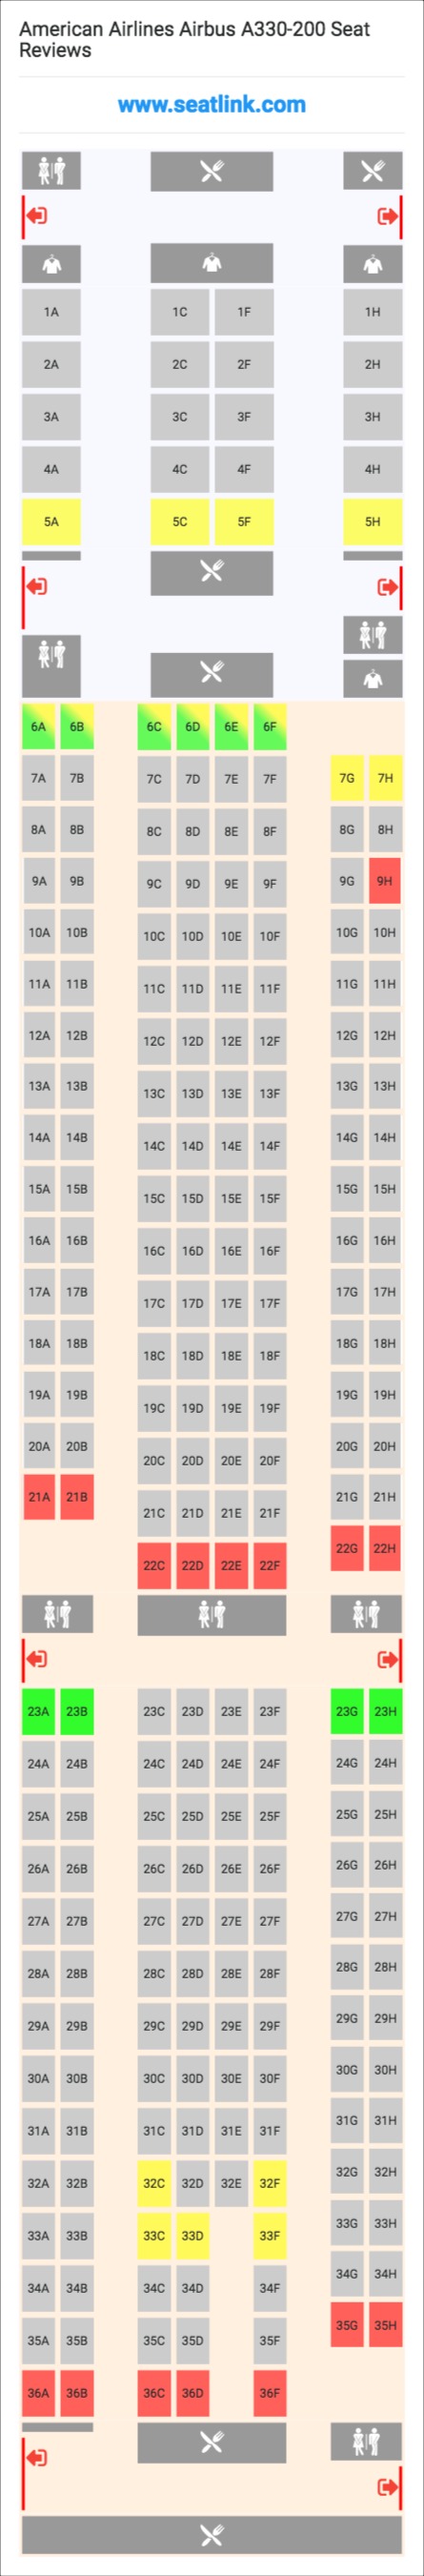 American Airlines Airbus A330-200 (332) Seat Map